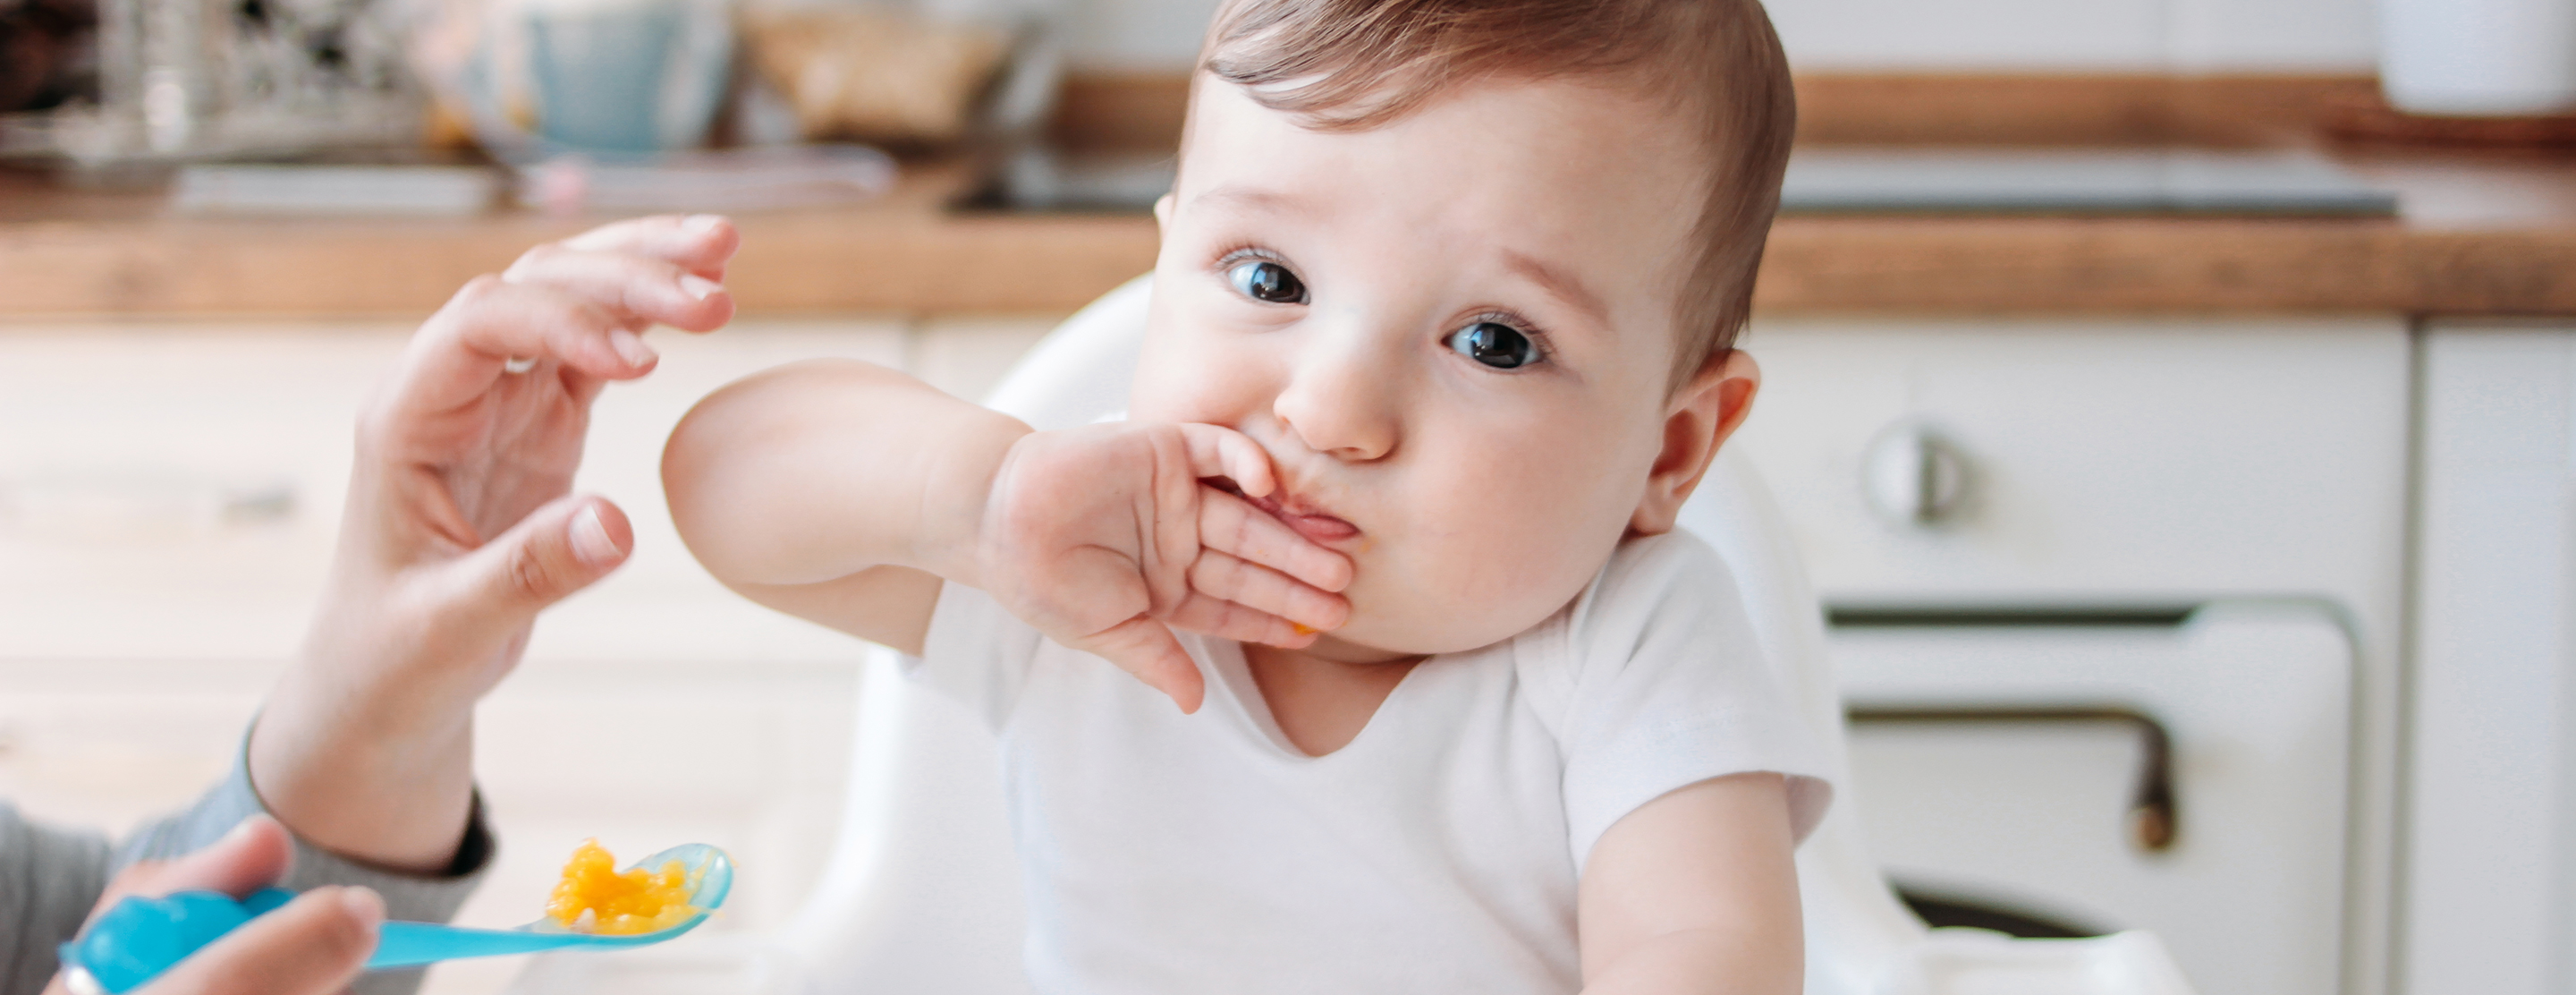 faq-introducing-your-baby-to-solid-foods-2x